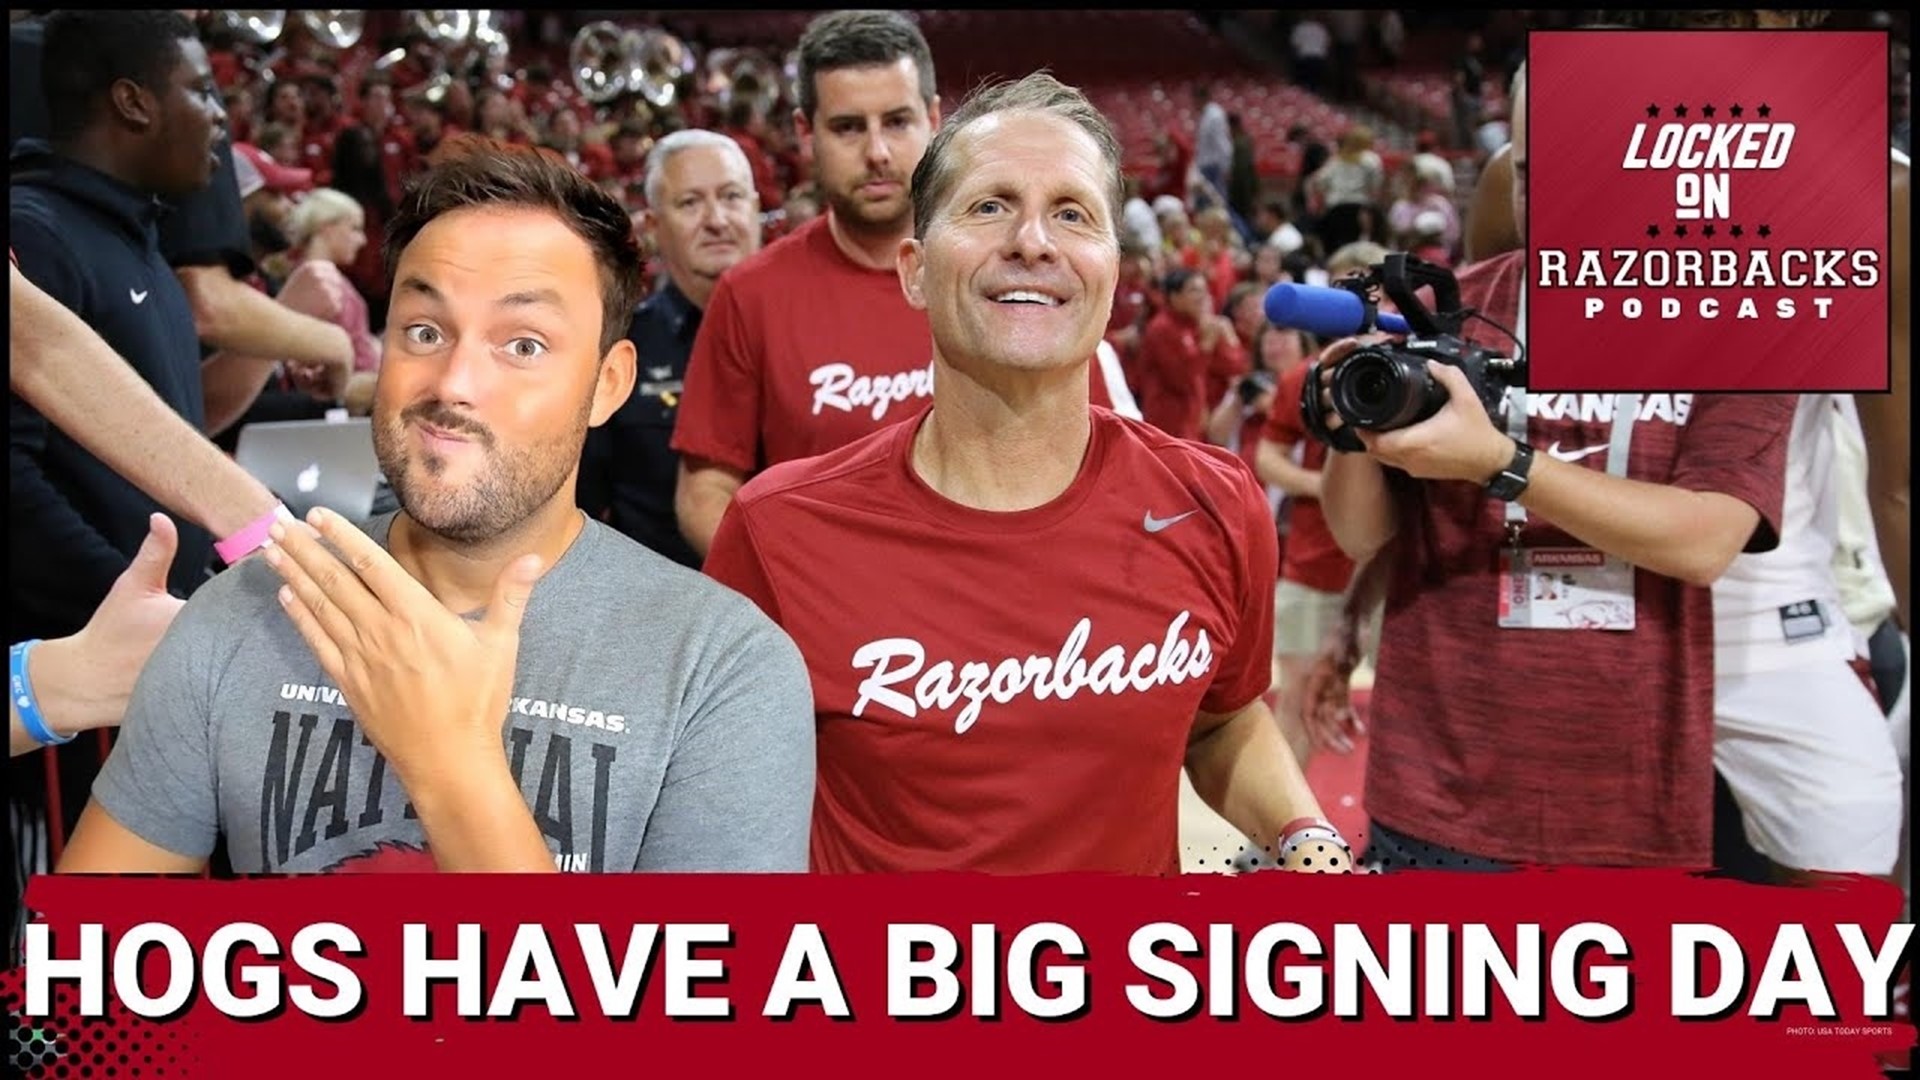 Razorback Basketball had a really solid signing day by getting 2 of the top players at their position coming in 2024.